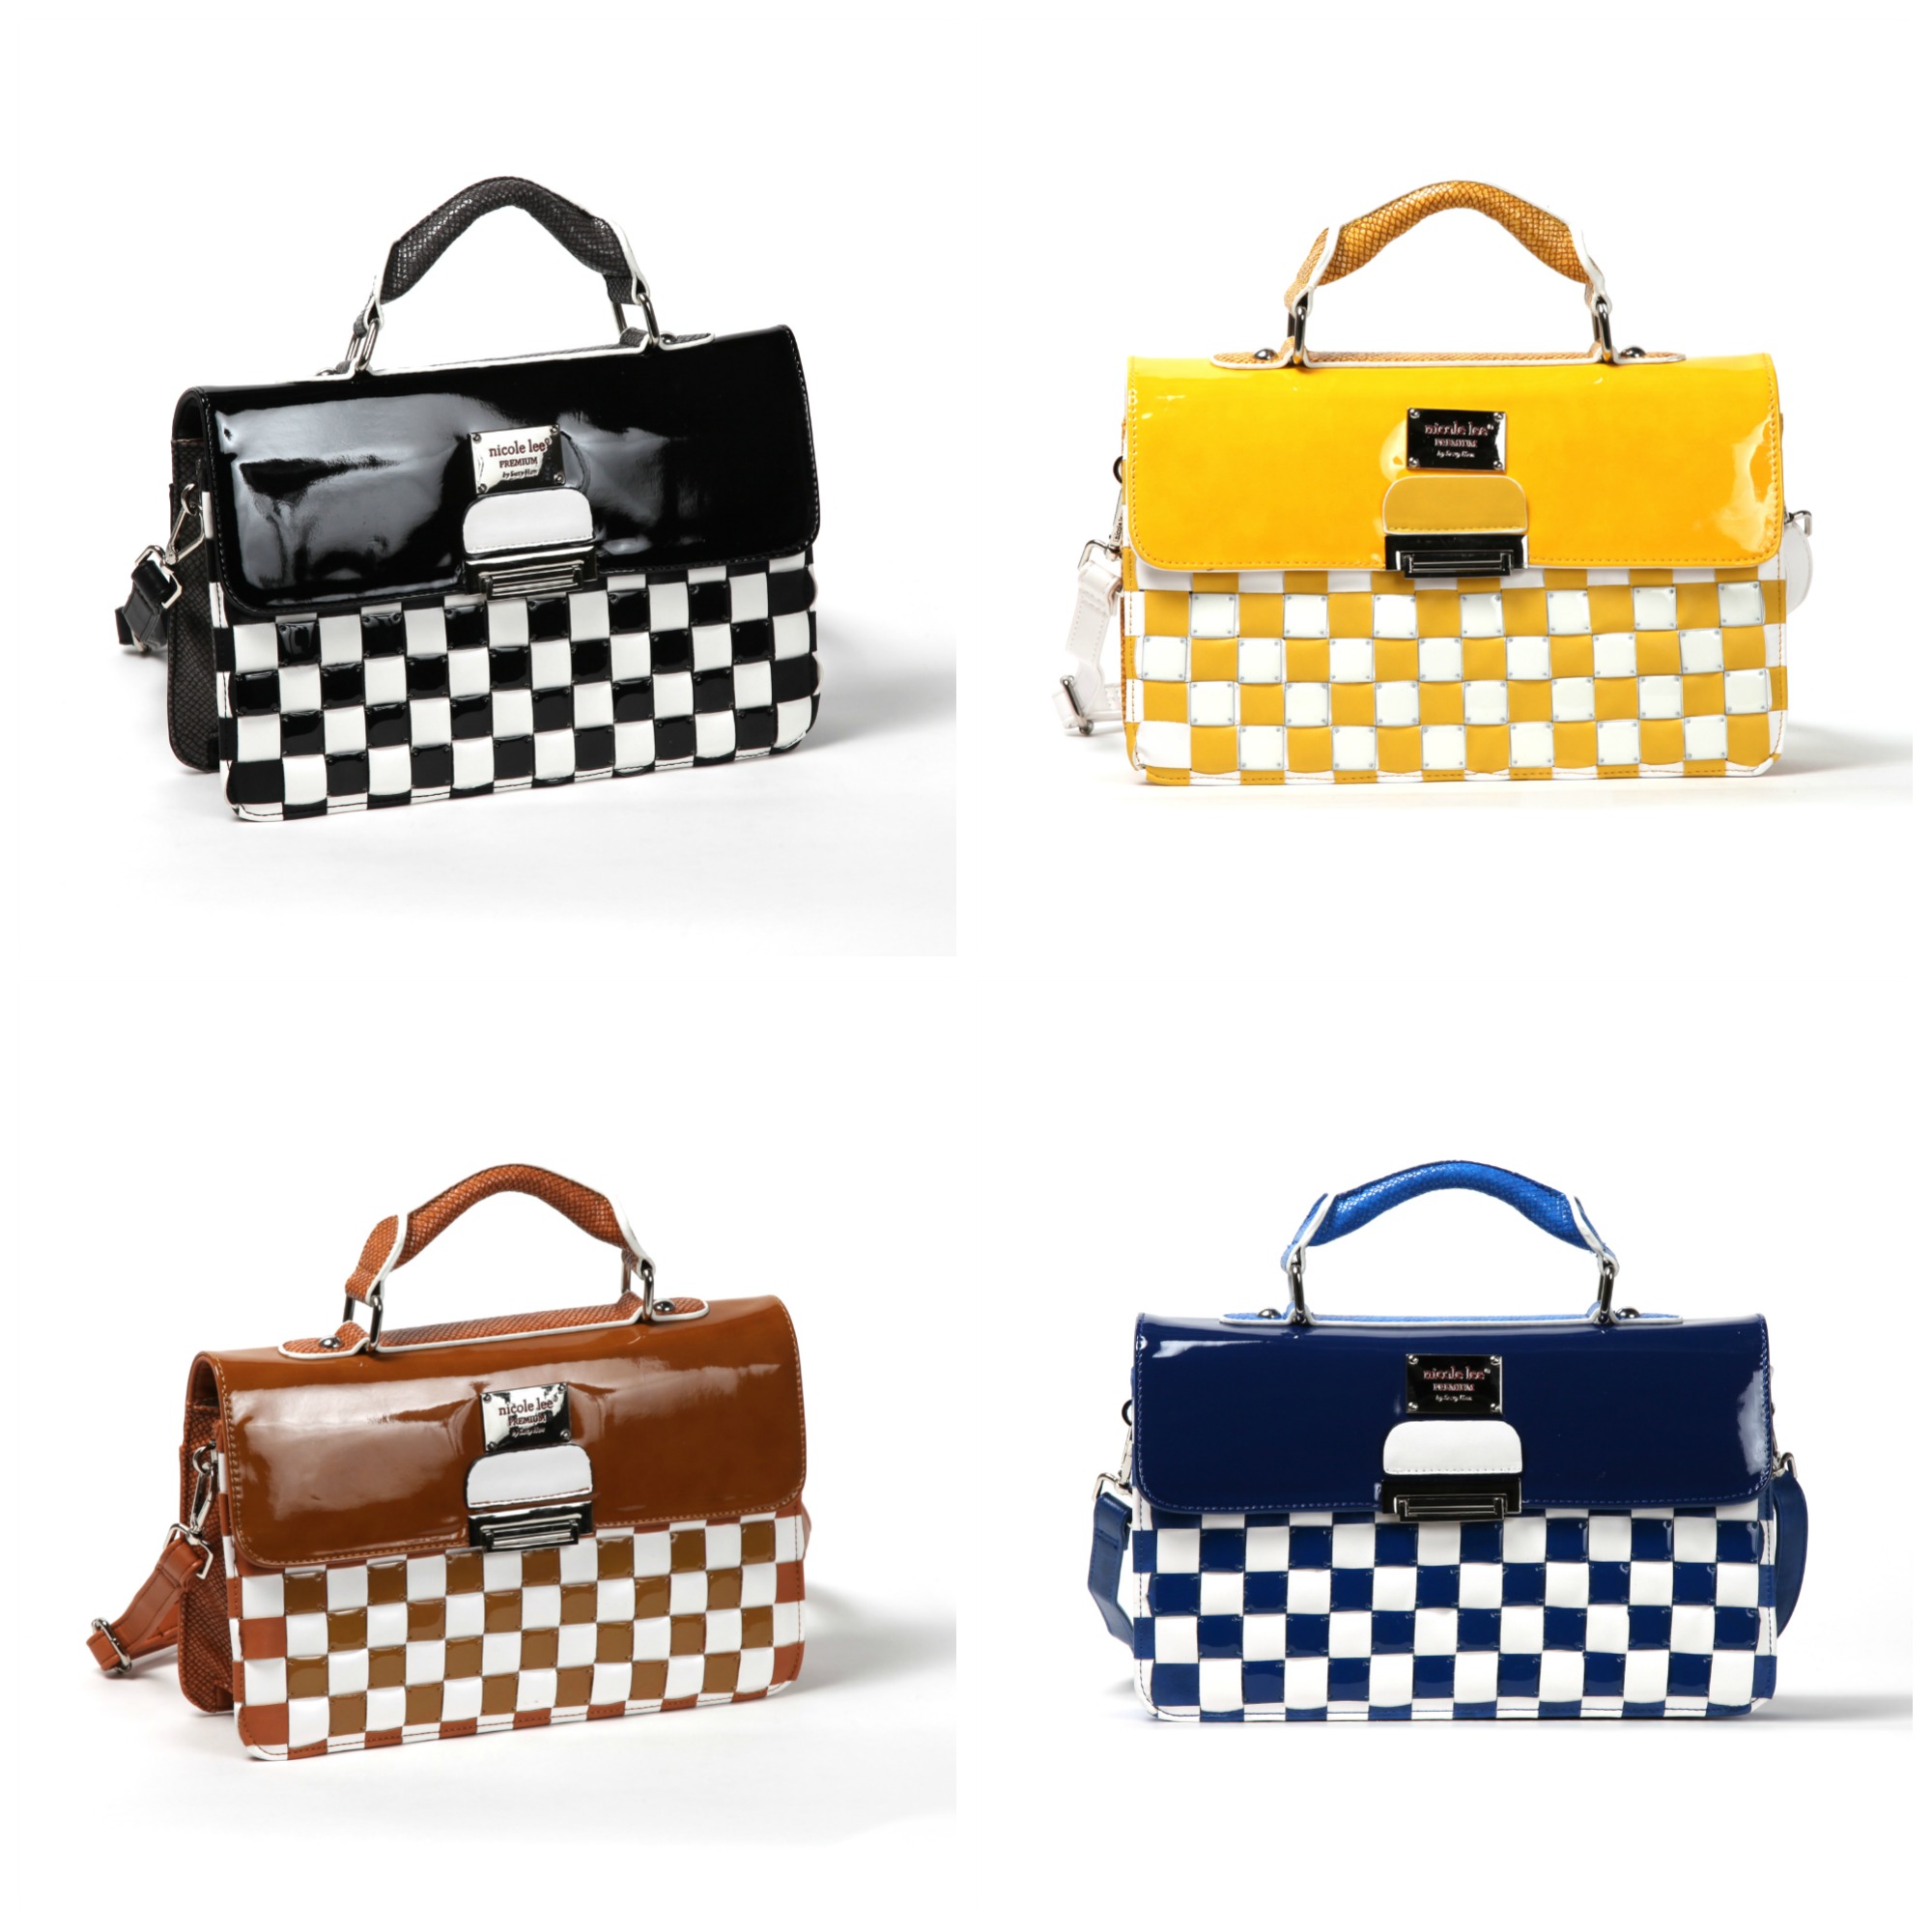 The Look for Less: “Louis Vuitton Check Print Purse”